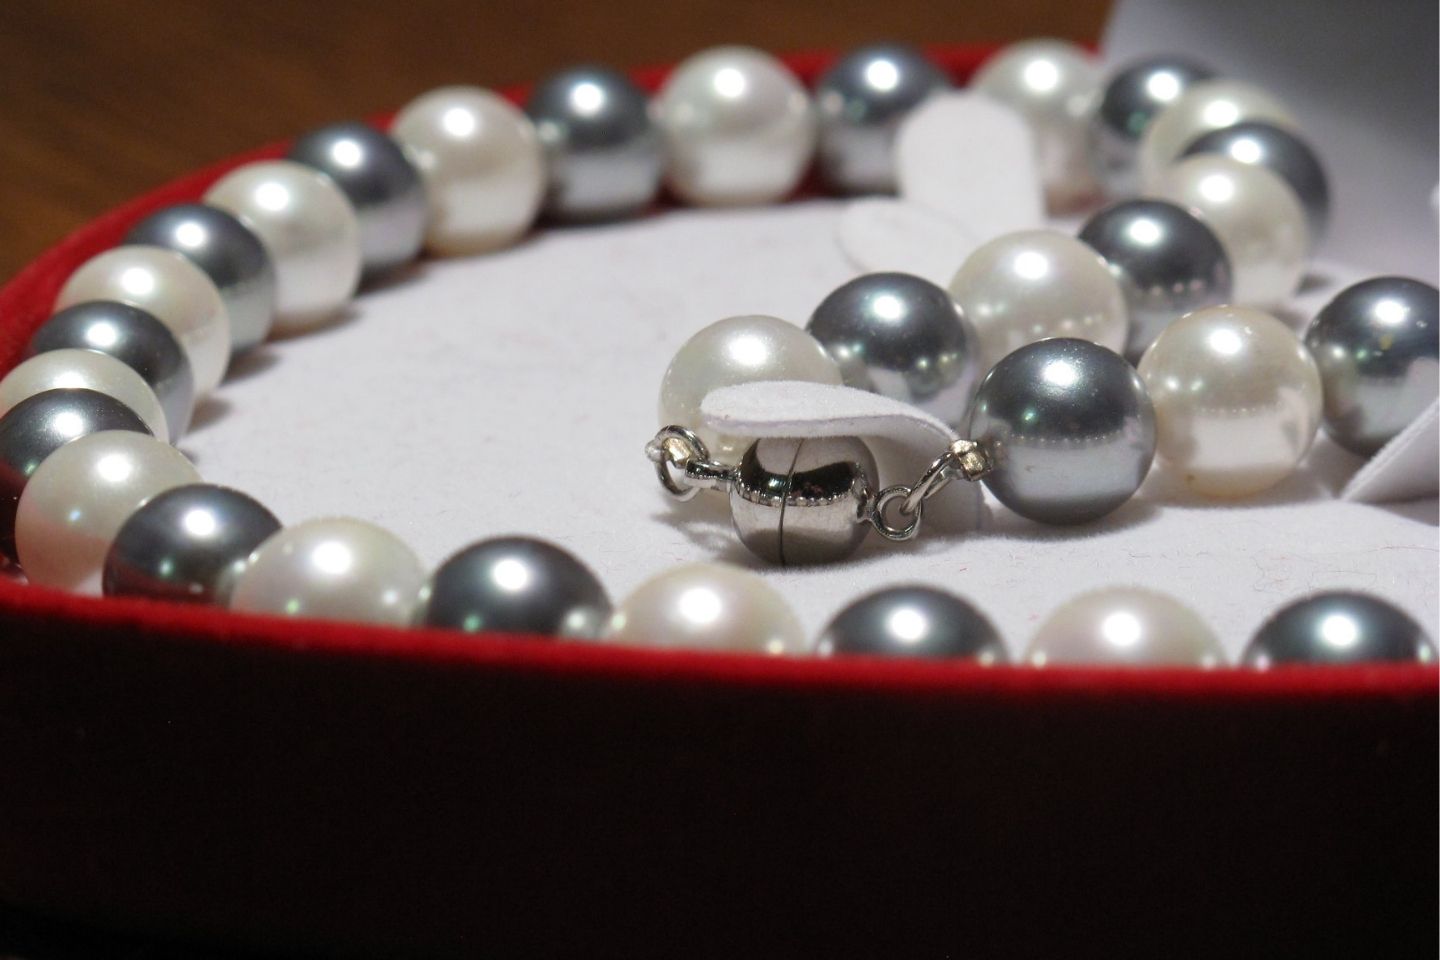 Cultured Pearls Shopping Places in Hyderabad